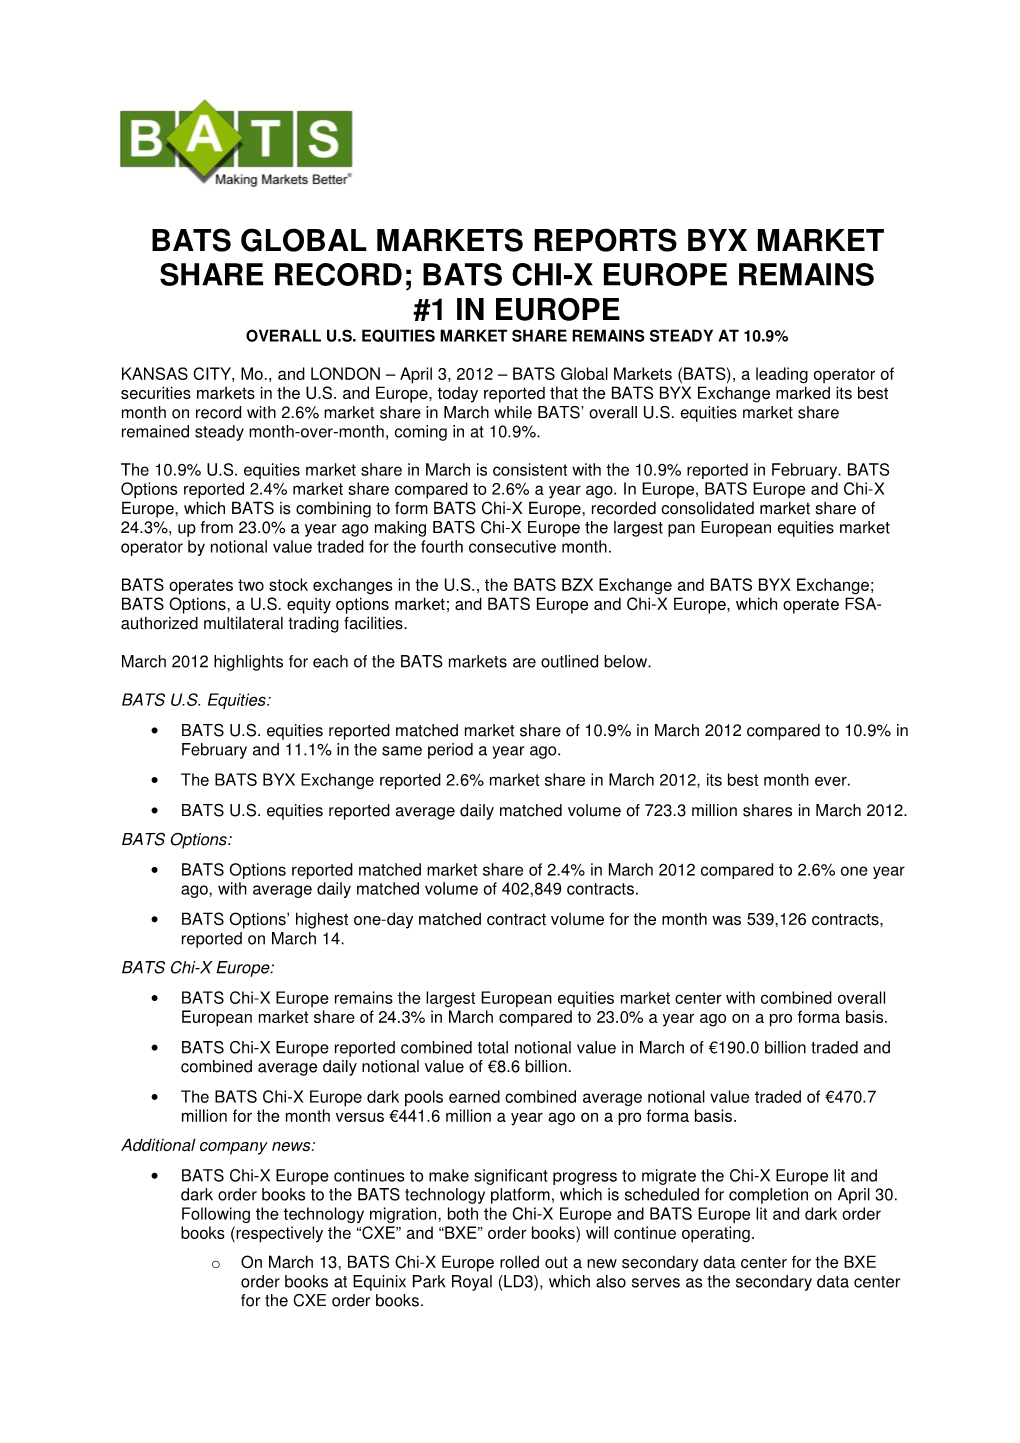 Bats Global Markets Reports Byx Market Share Record; Bats Chi-X Europe Remains #1 in Europe Overall U.S